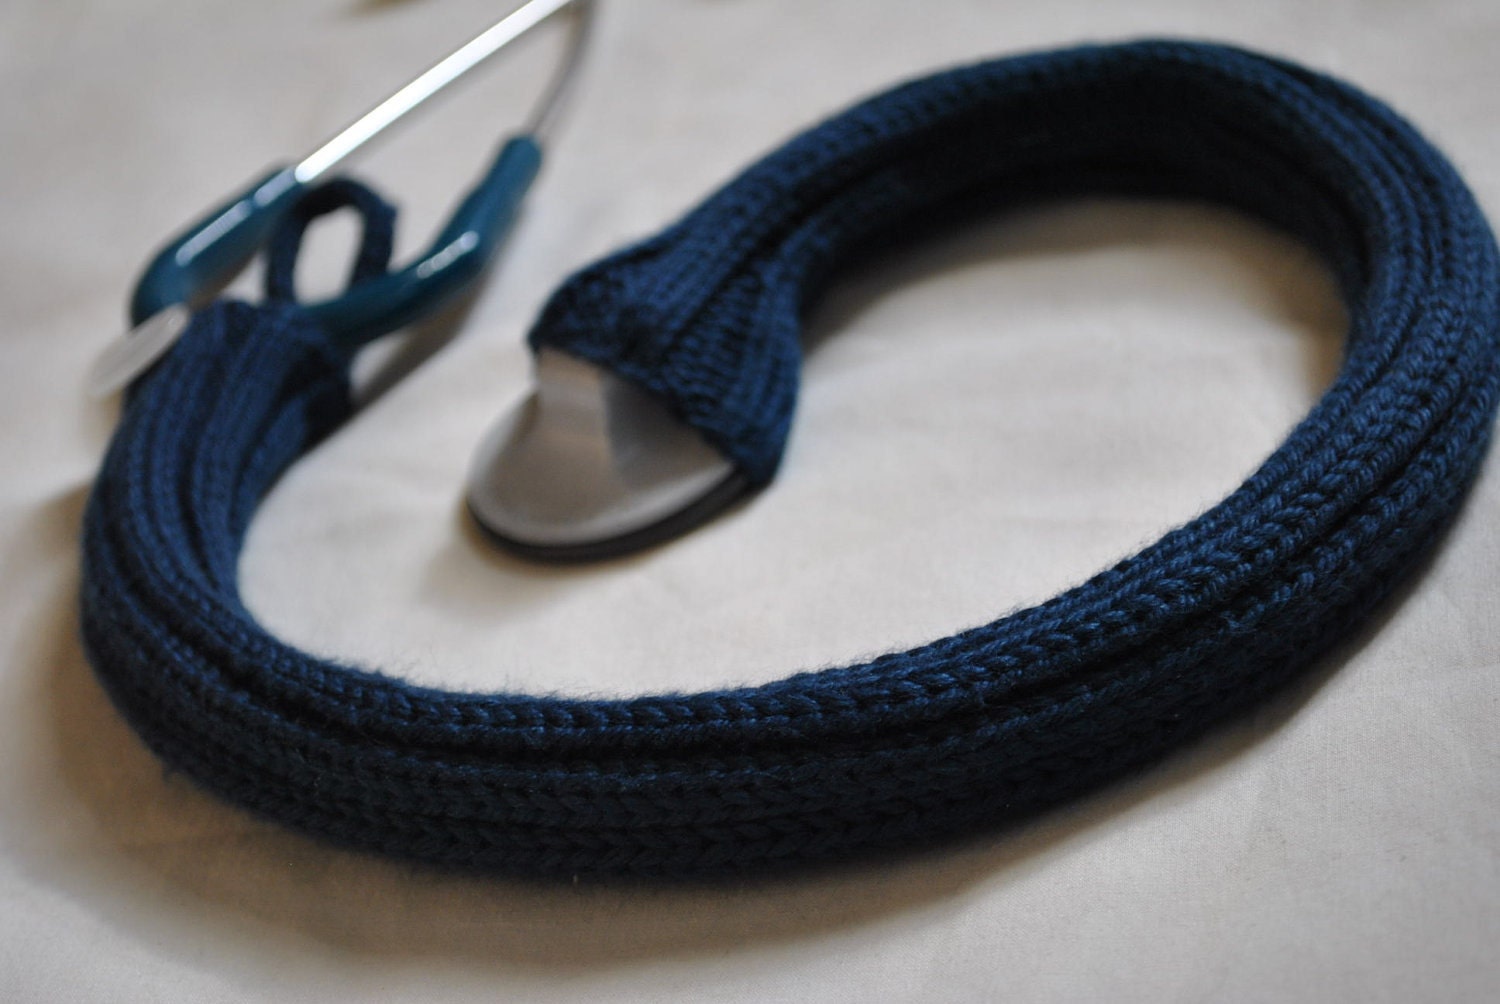 Custom Made Knitted Stethoscope Cover by empoweredlife on Etsy